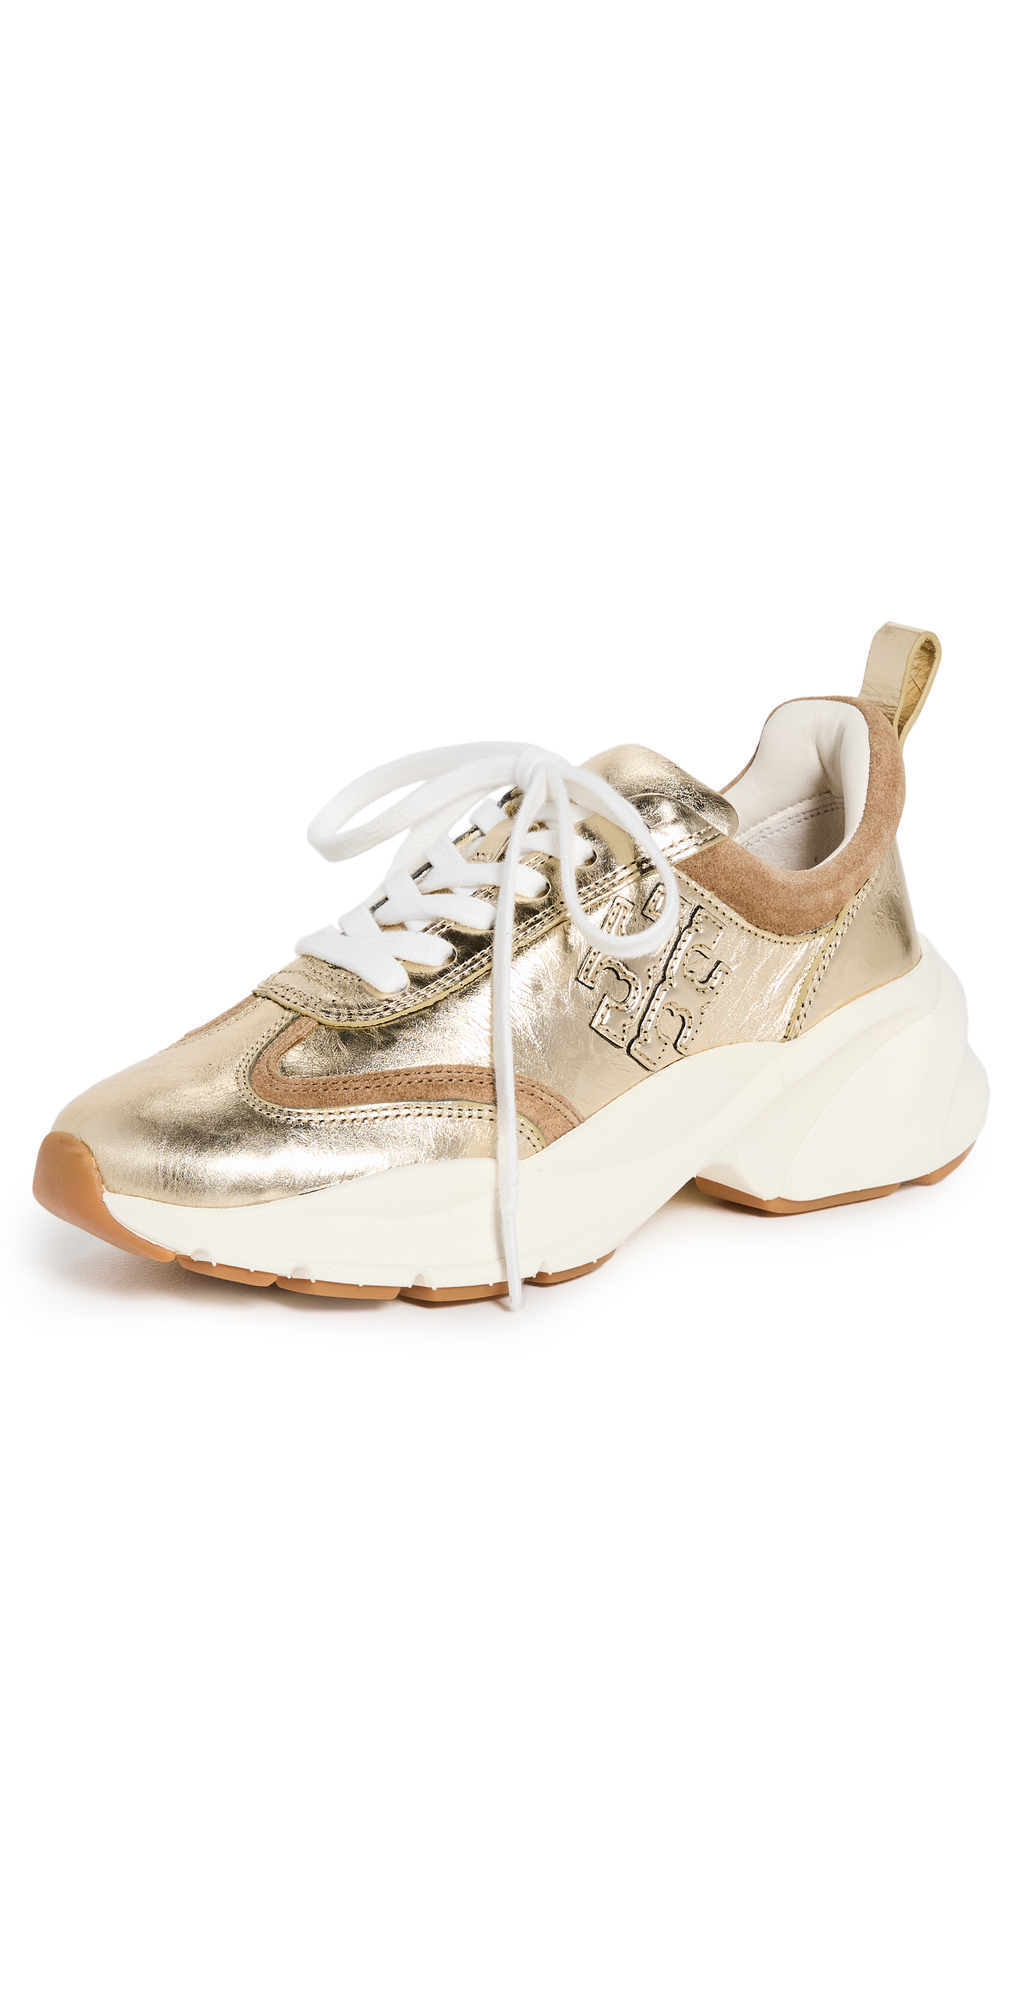 Tory Burch Good Luck Sneakers in gold